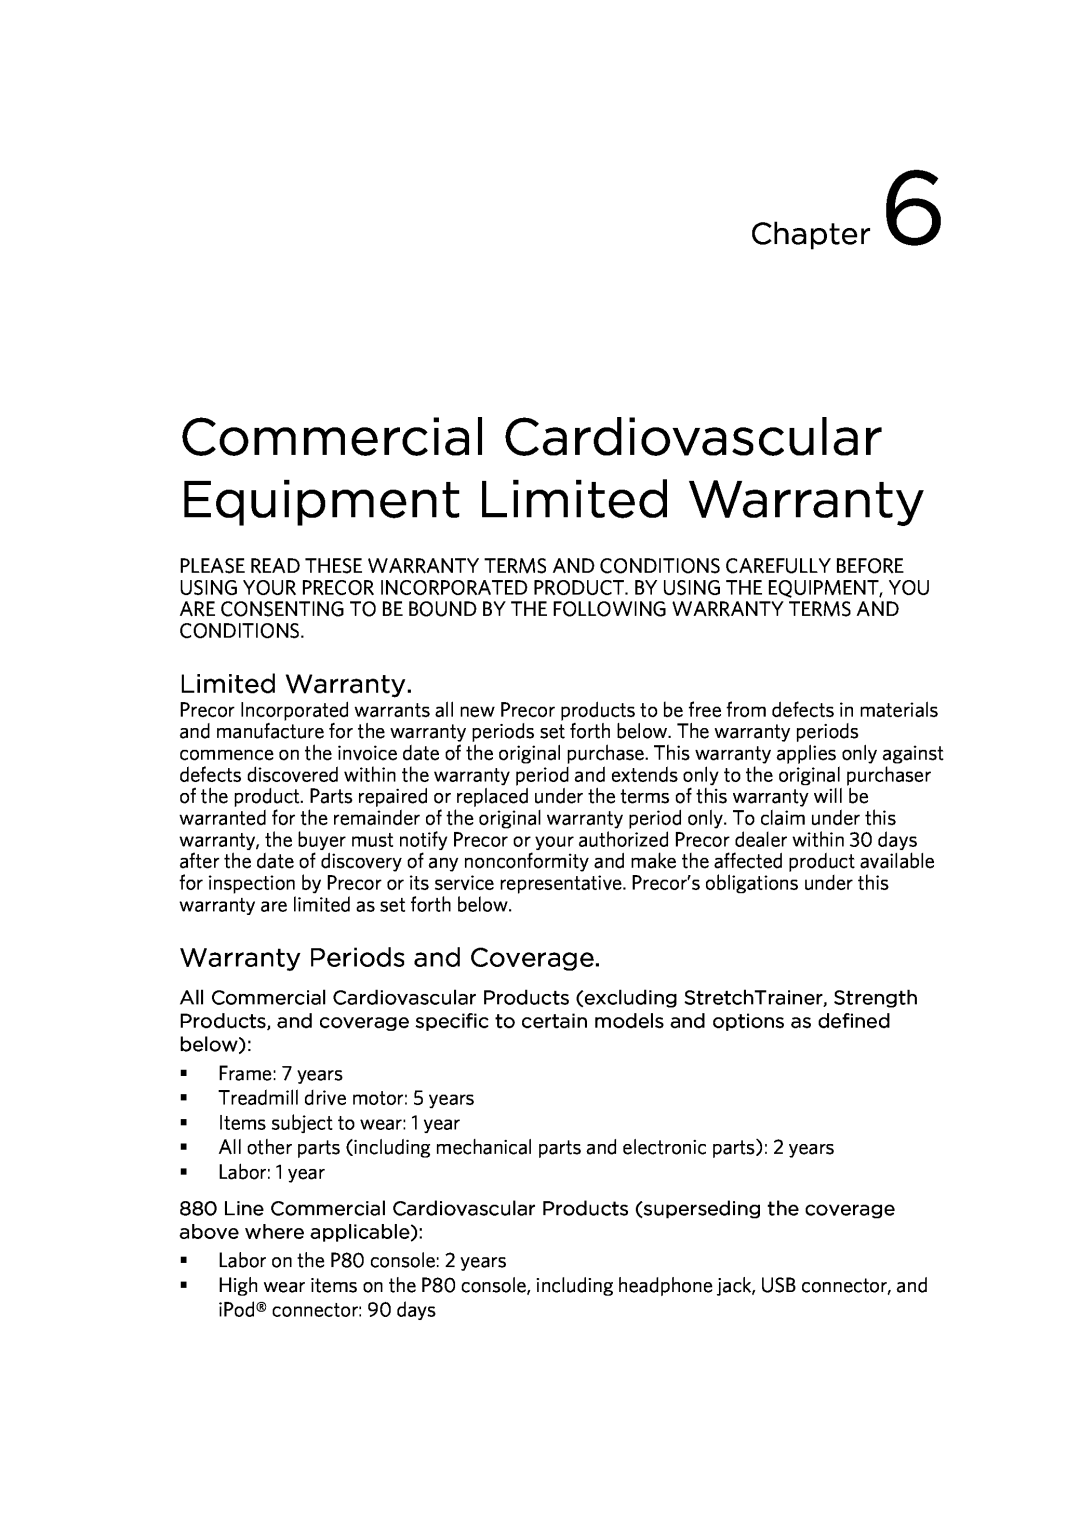 Precor 300753-201 manual Commercial Cardiovascular Equipment Limited Warranty, Warranty Periods and Coverage, Chapter 